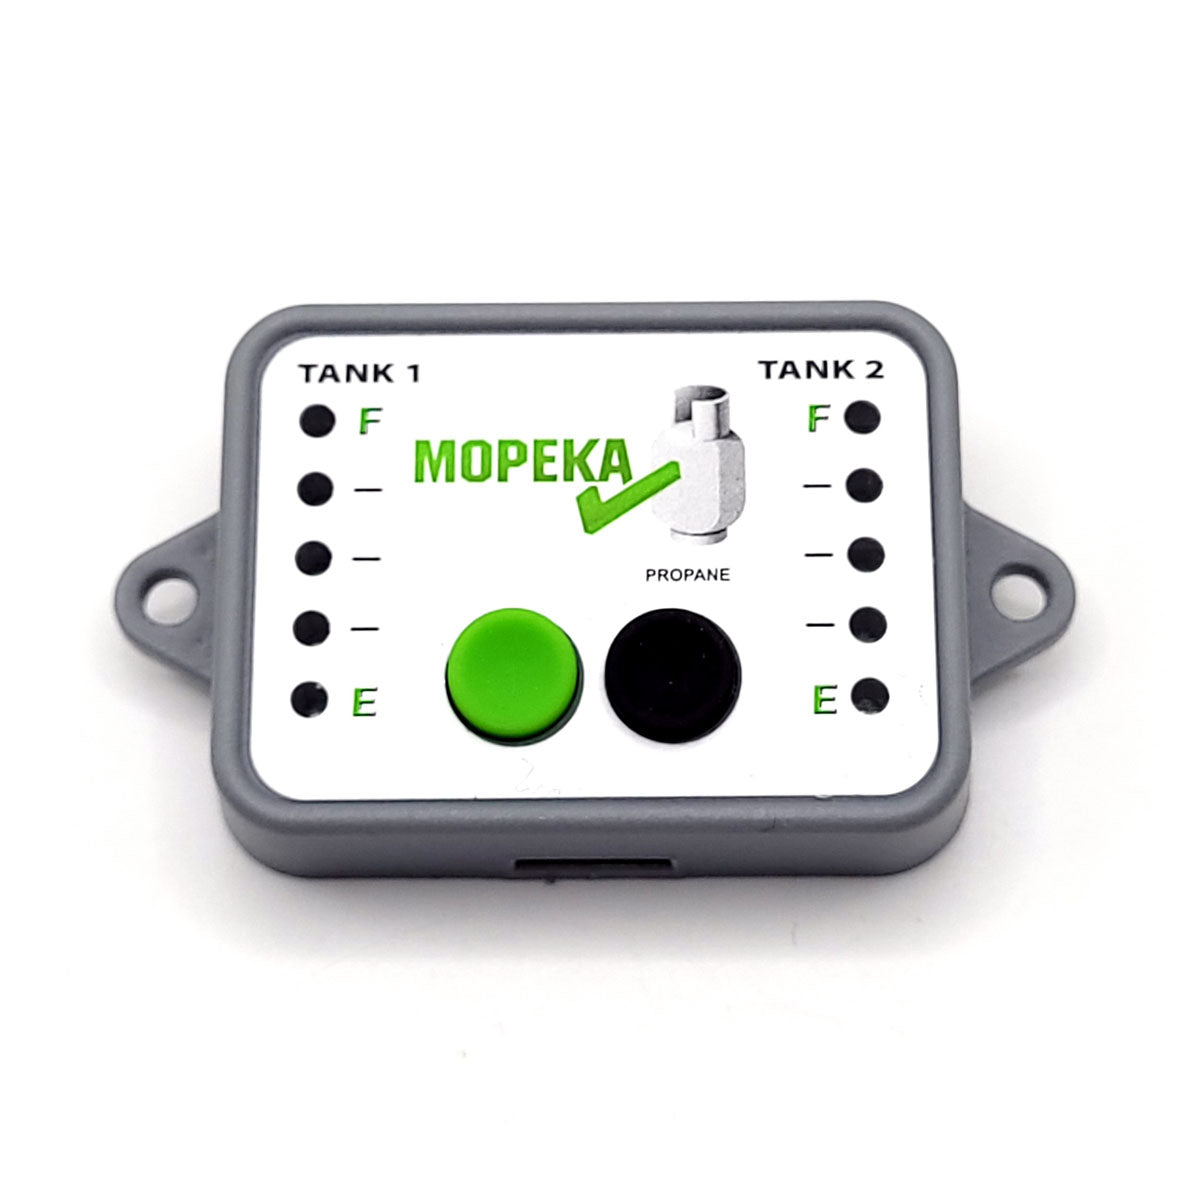 MOPEKA LPG Gas Level Monitor Receiver for 2 Gas Cylinder Sensors